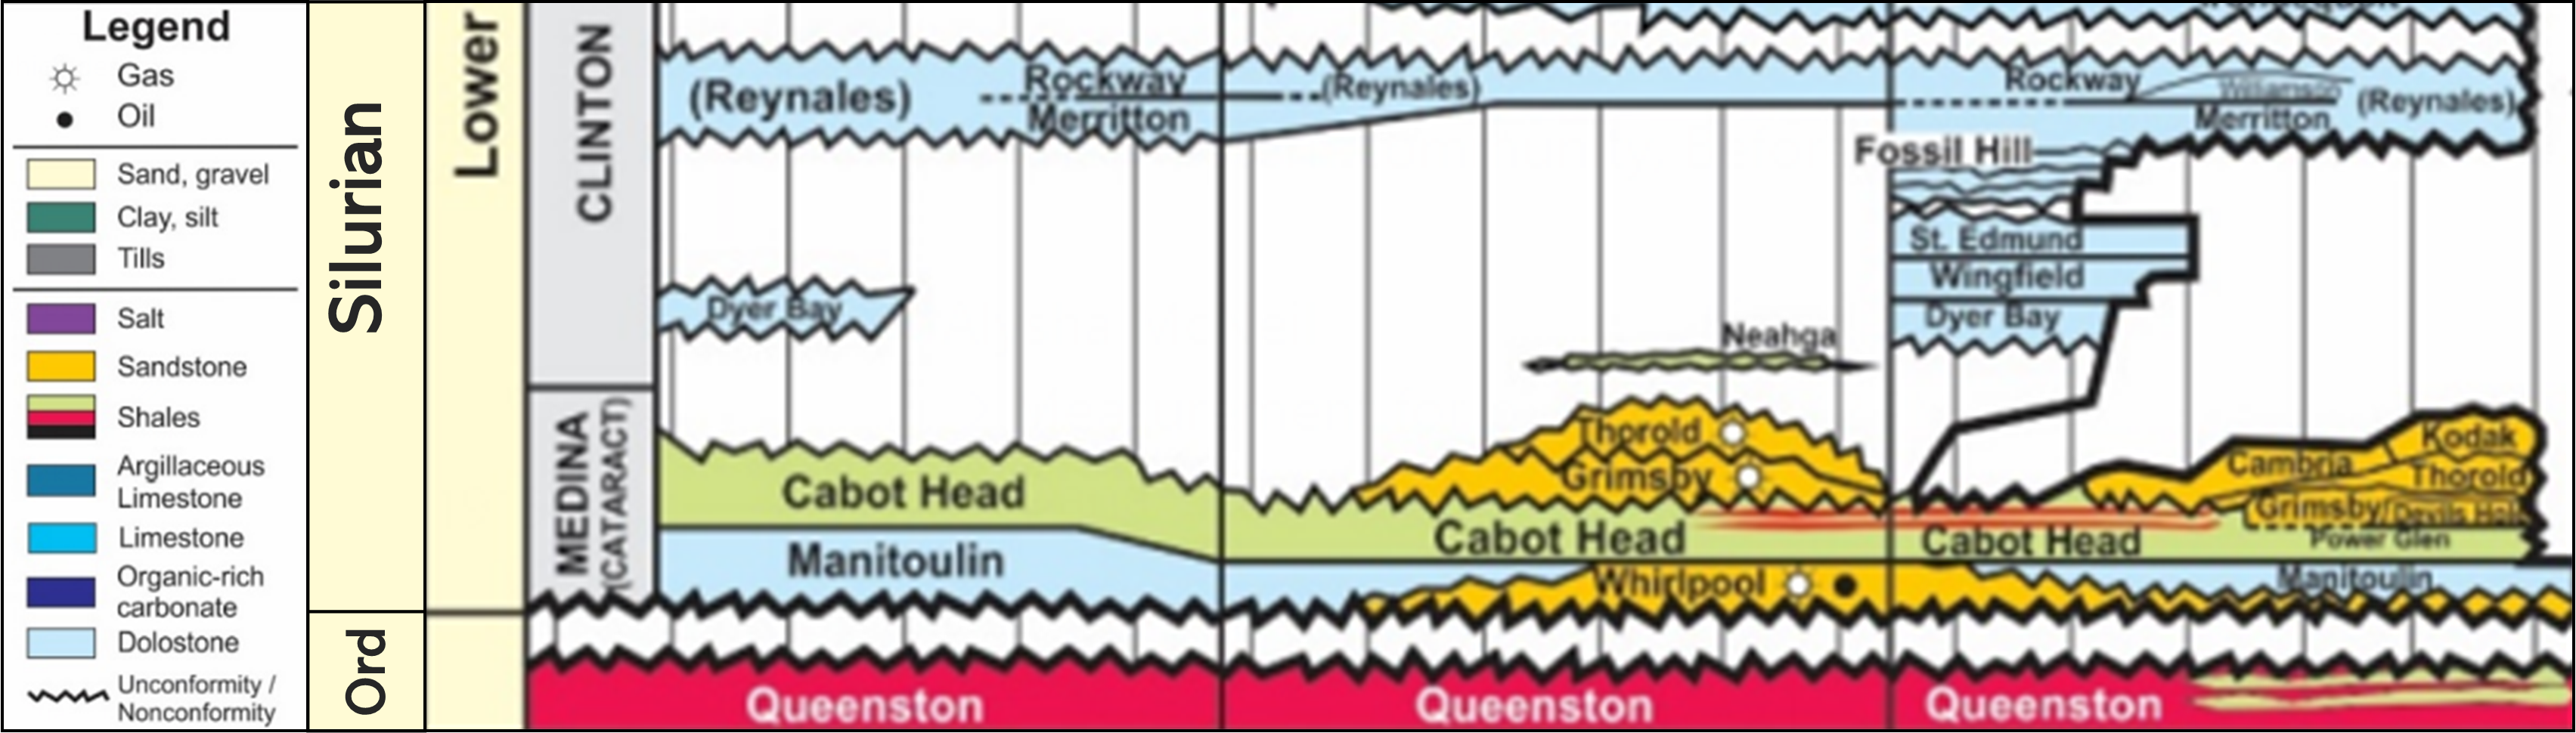 Stratigraphic chart of part of the Upper Ordovician (Ord) and Lower Silurian rocks in southern Ontario (Carter et al. 2019, GSC Open File 8618). 